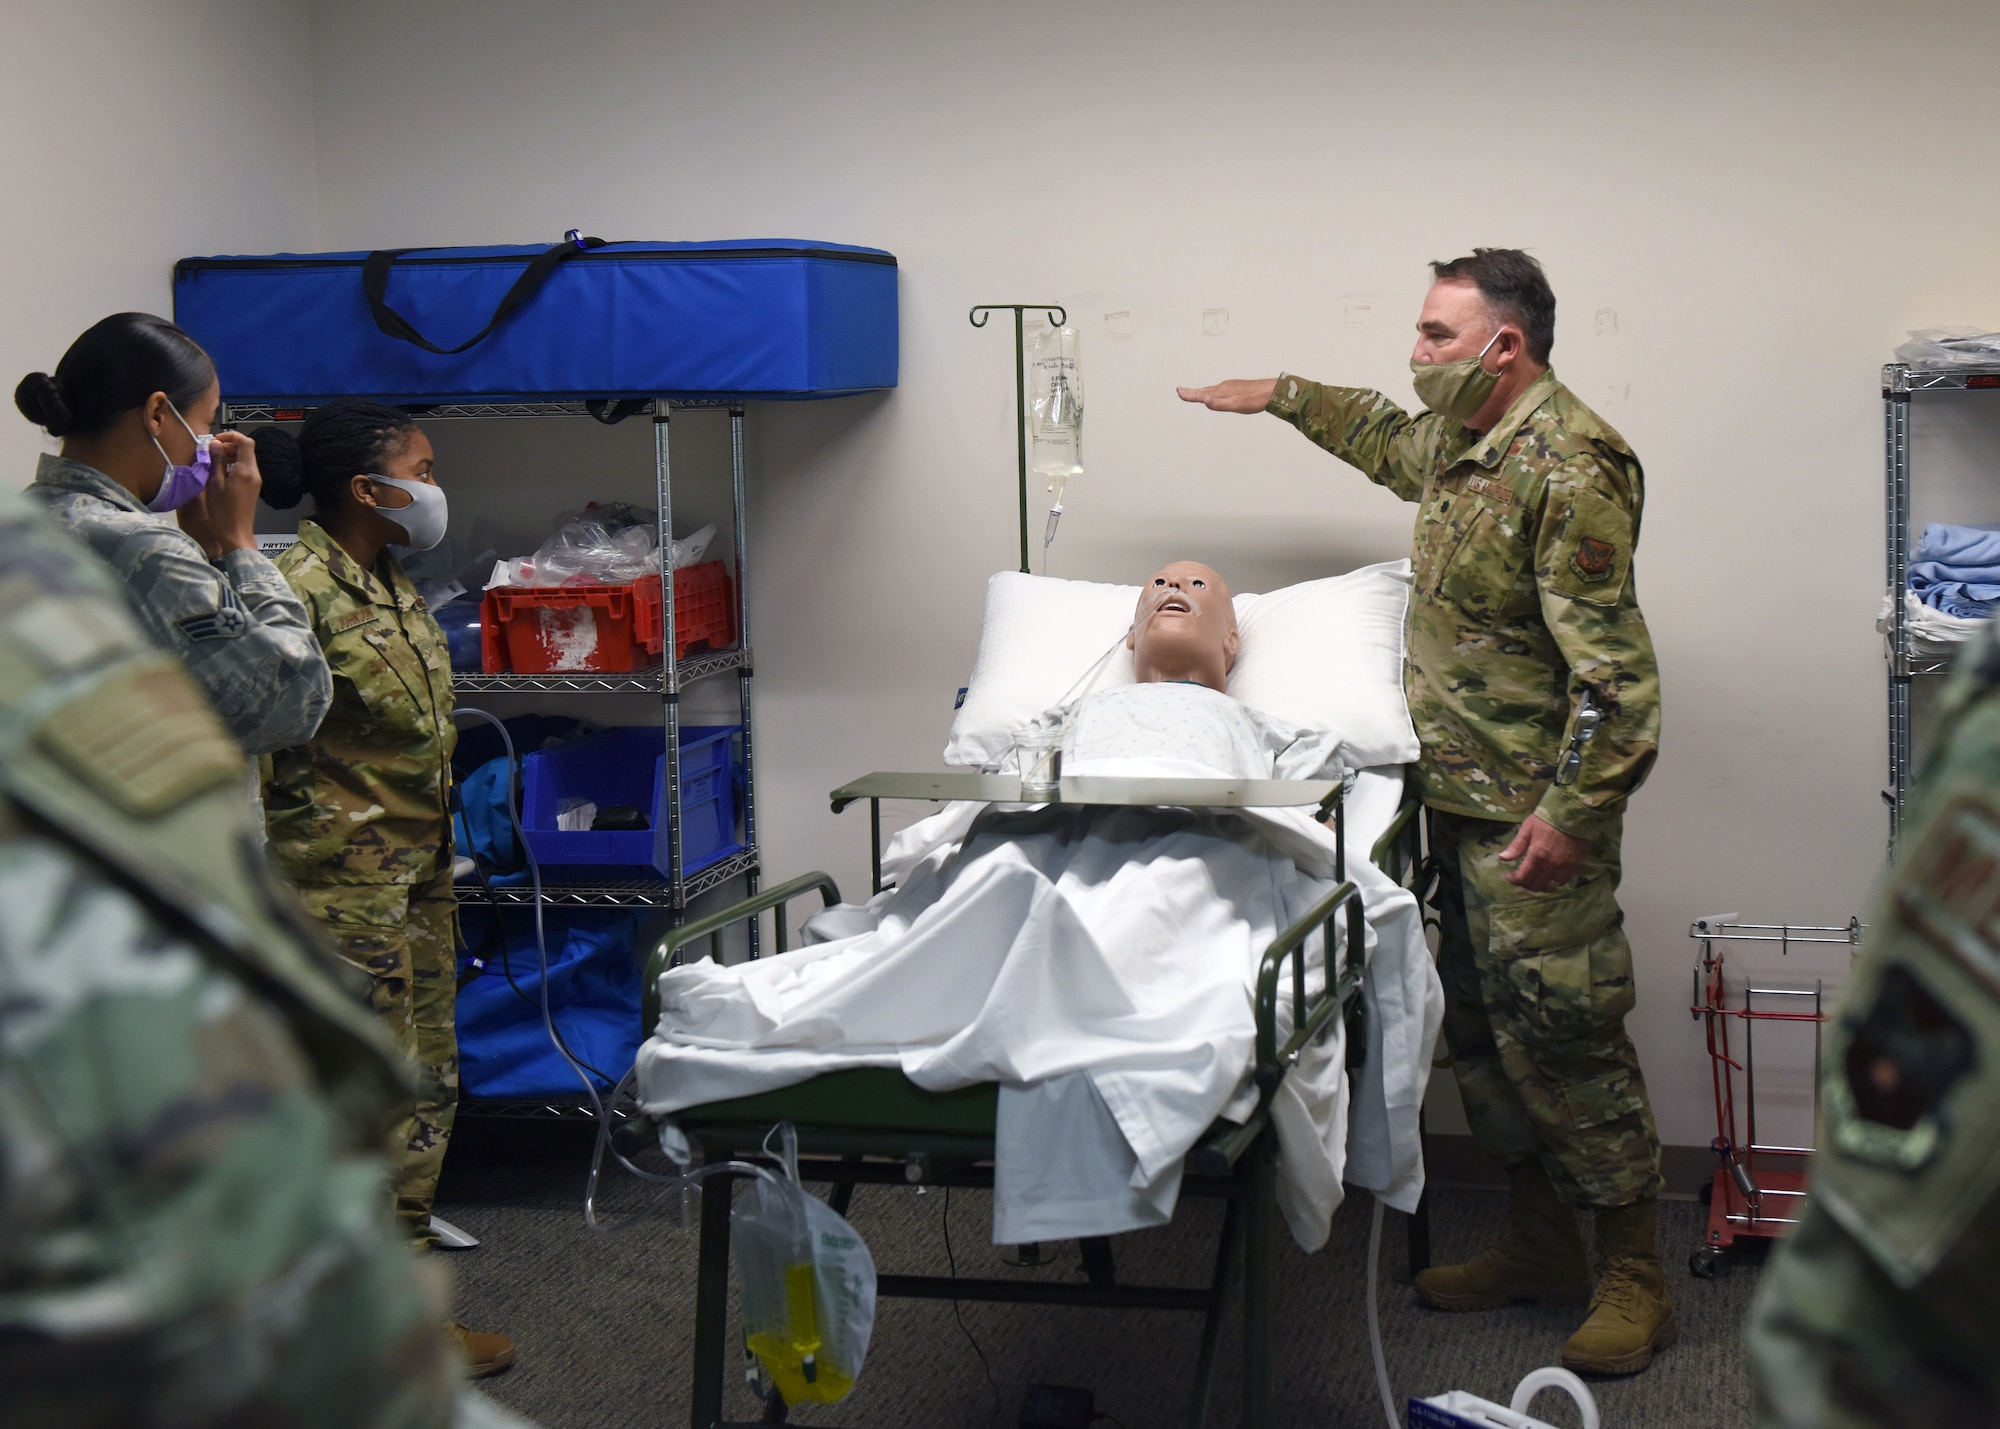 Lt. Col. Darren Damiani, 460th Medical Group chief nurse, conducts training at the Human Performance Center on Buckley Air Force Base, Colo., May 6, 2020. During the training session, Damiani ran through multiple scenarios that cover the fundamentals of inpatient treatment such as inserting nasogastric tubes, inserting catheters and much more. The purpose of the training is to ensure medical personnel are prepared in case they have to provide support for COVID-19 elsewhere. (U.S. Air Force photo by Airman 1st Class Haley N. Blevins)